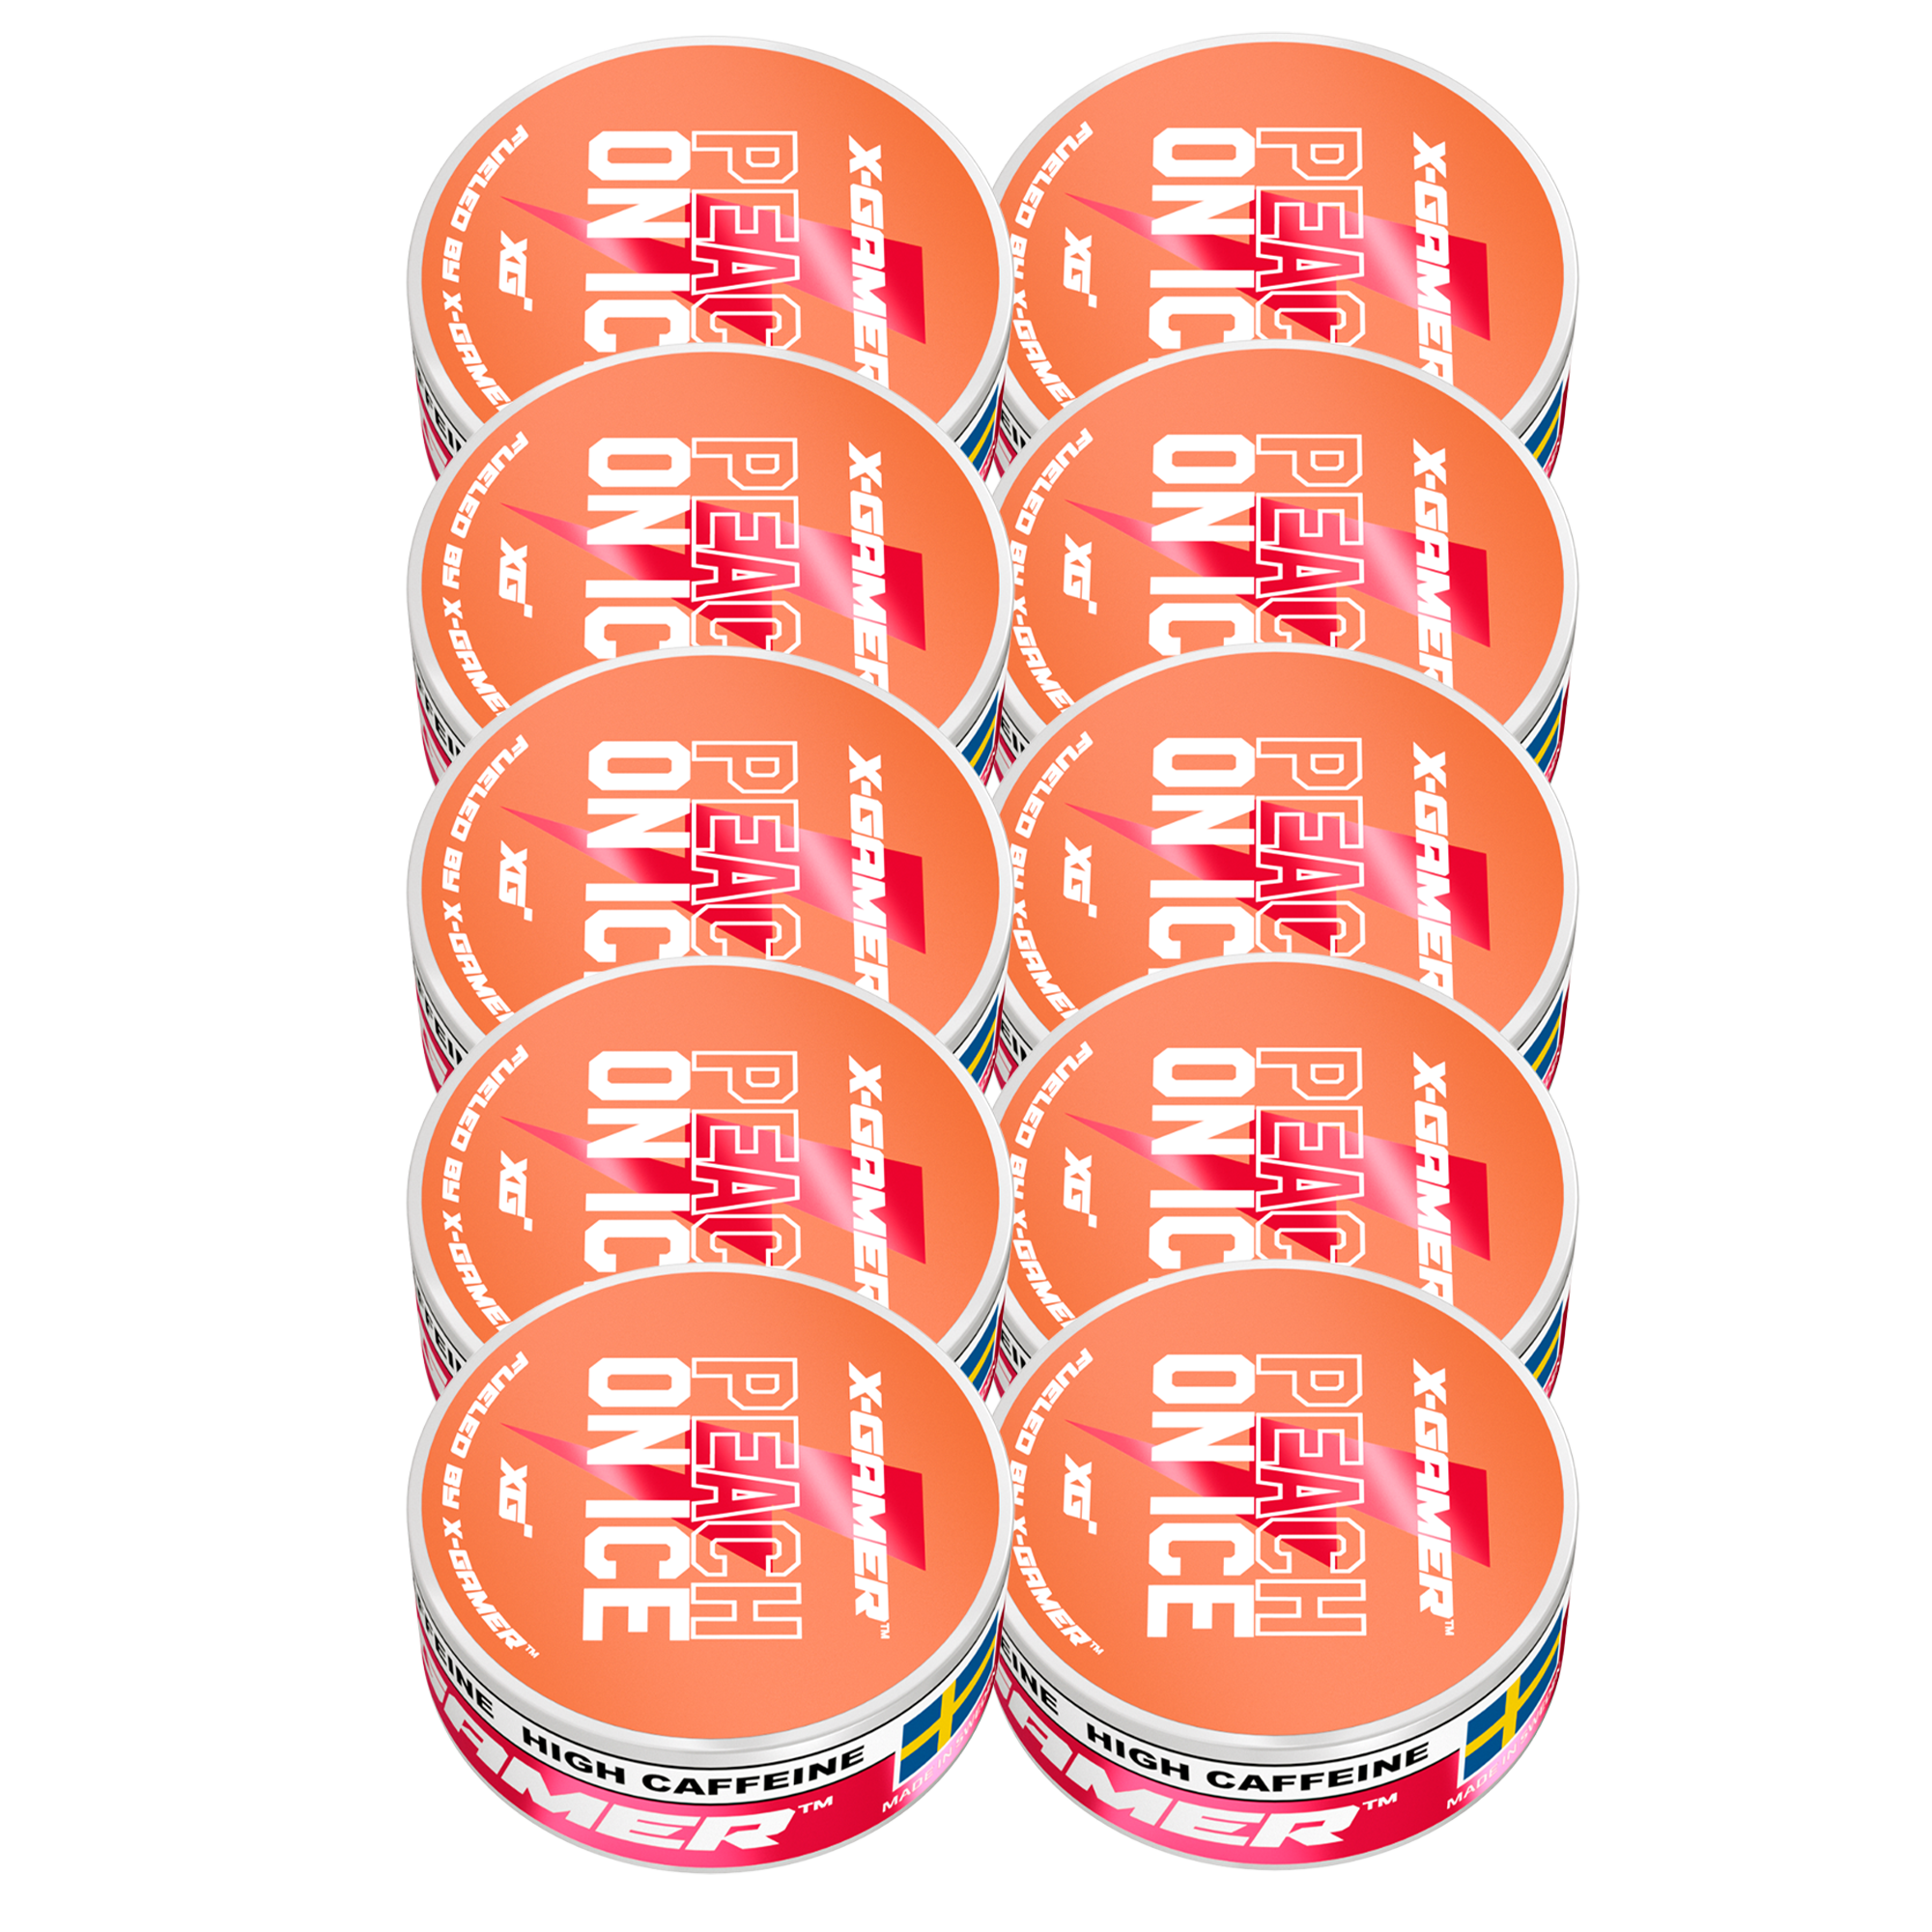 Peach on Ice Energy Pouches (10 Pack/200 Pouches)